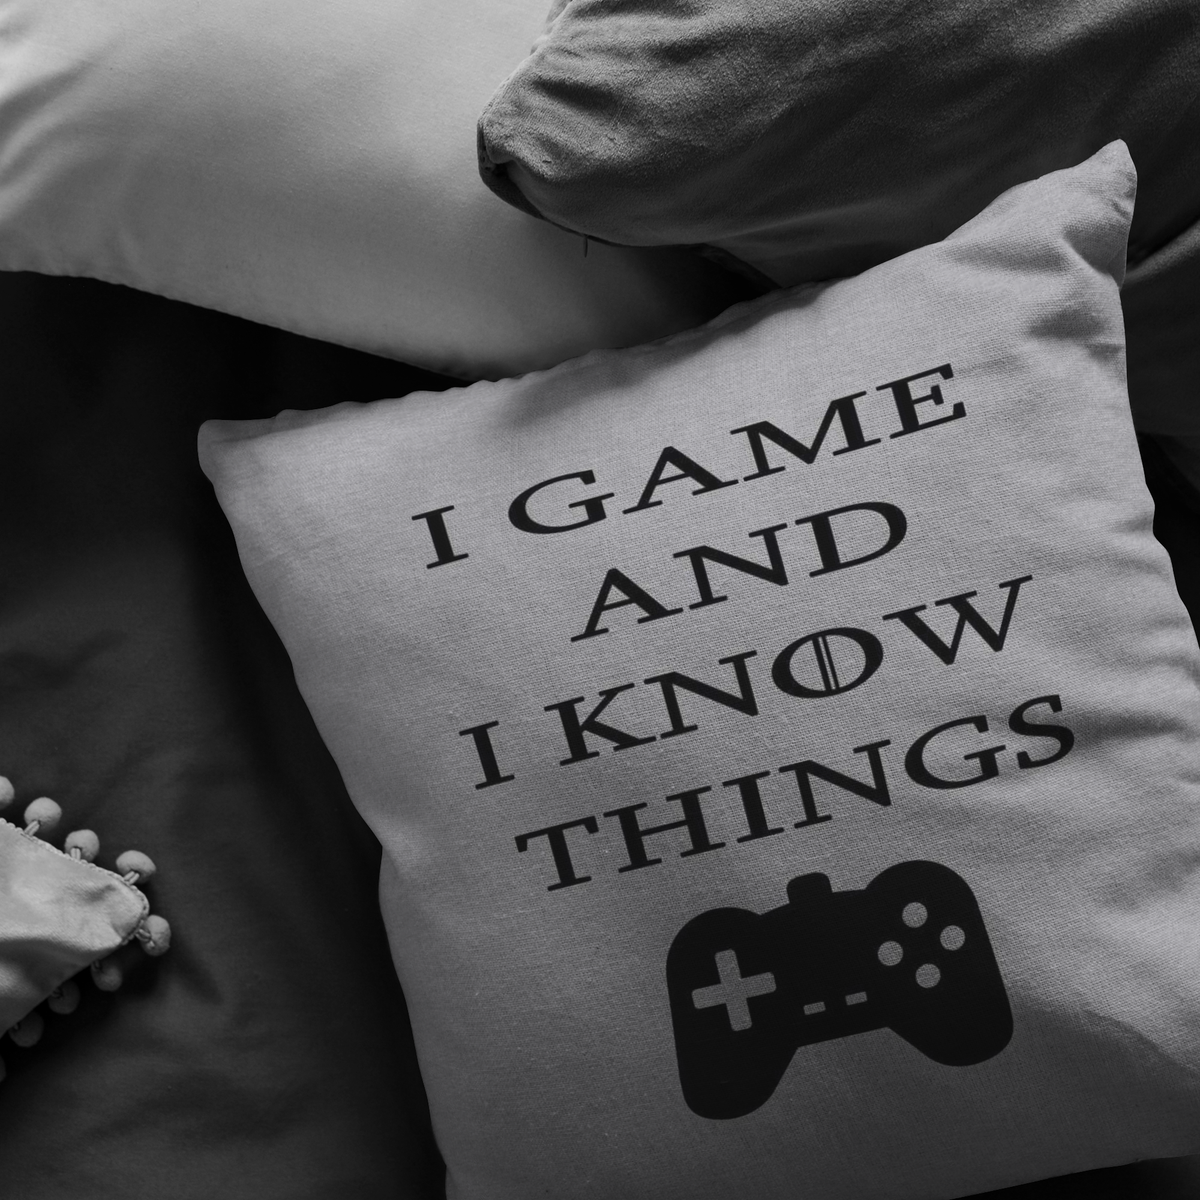 Gamers Gift I Game And I Know Things Throw Pillow